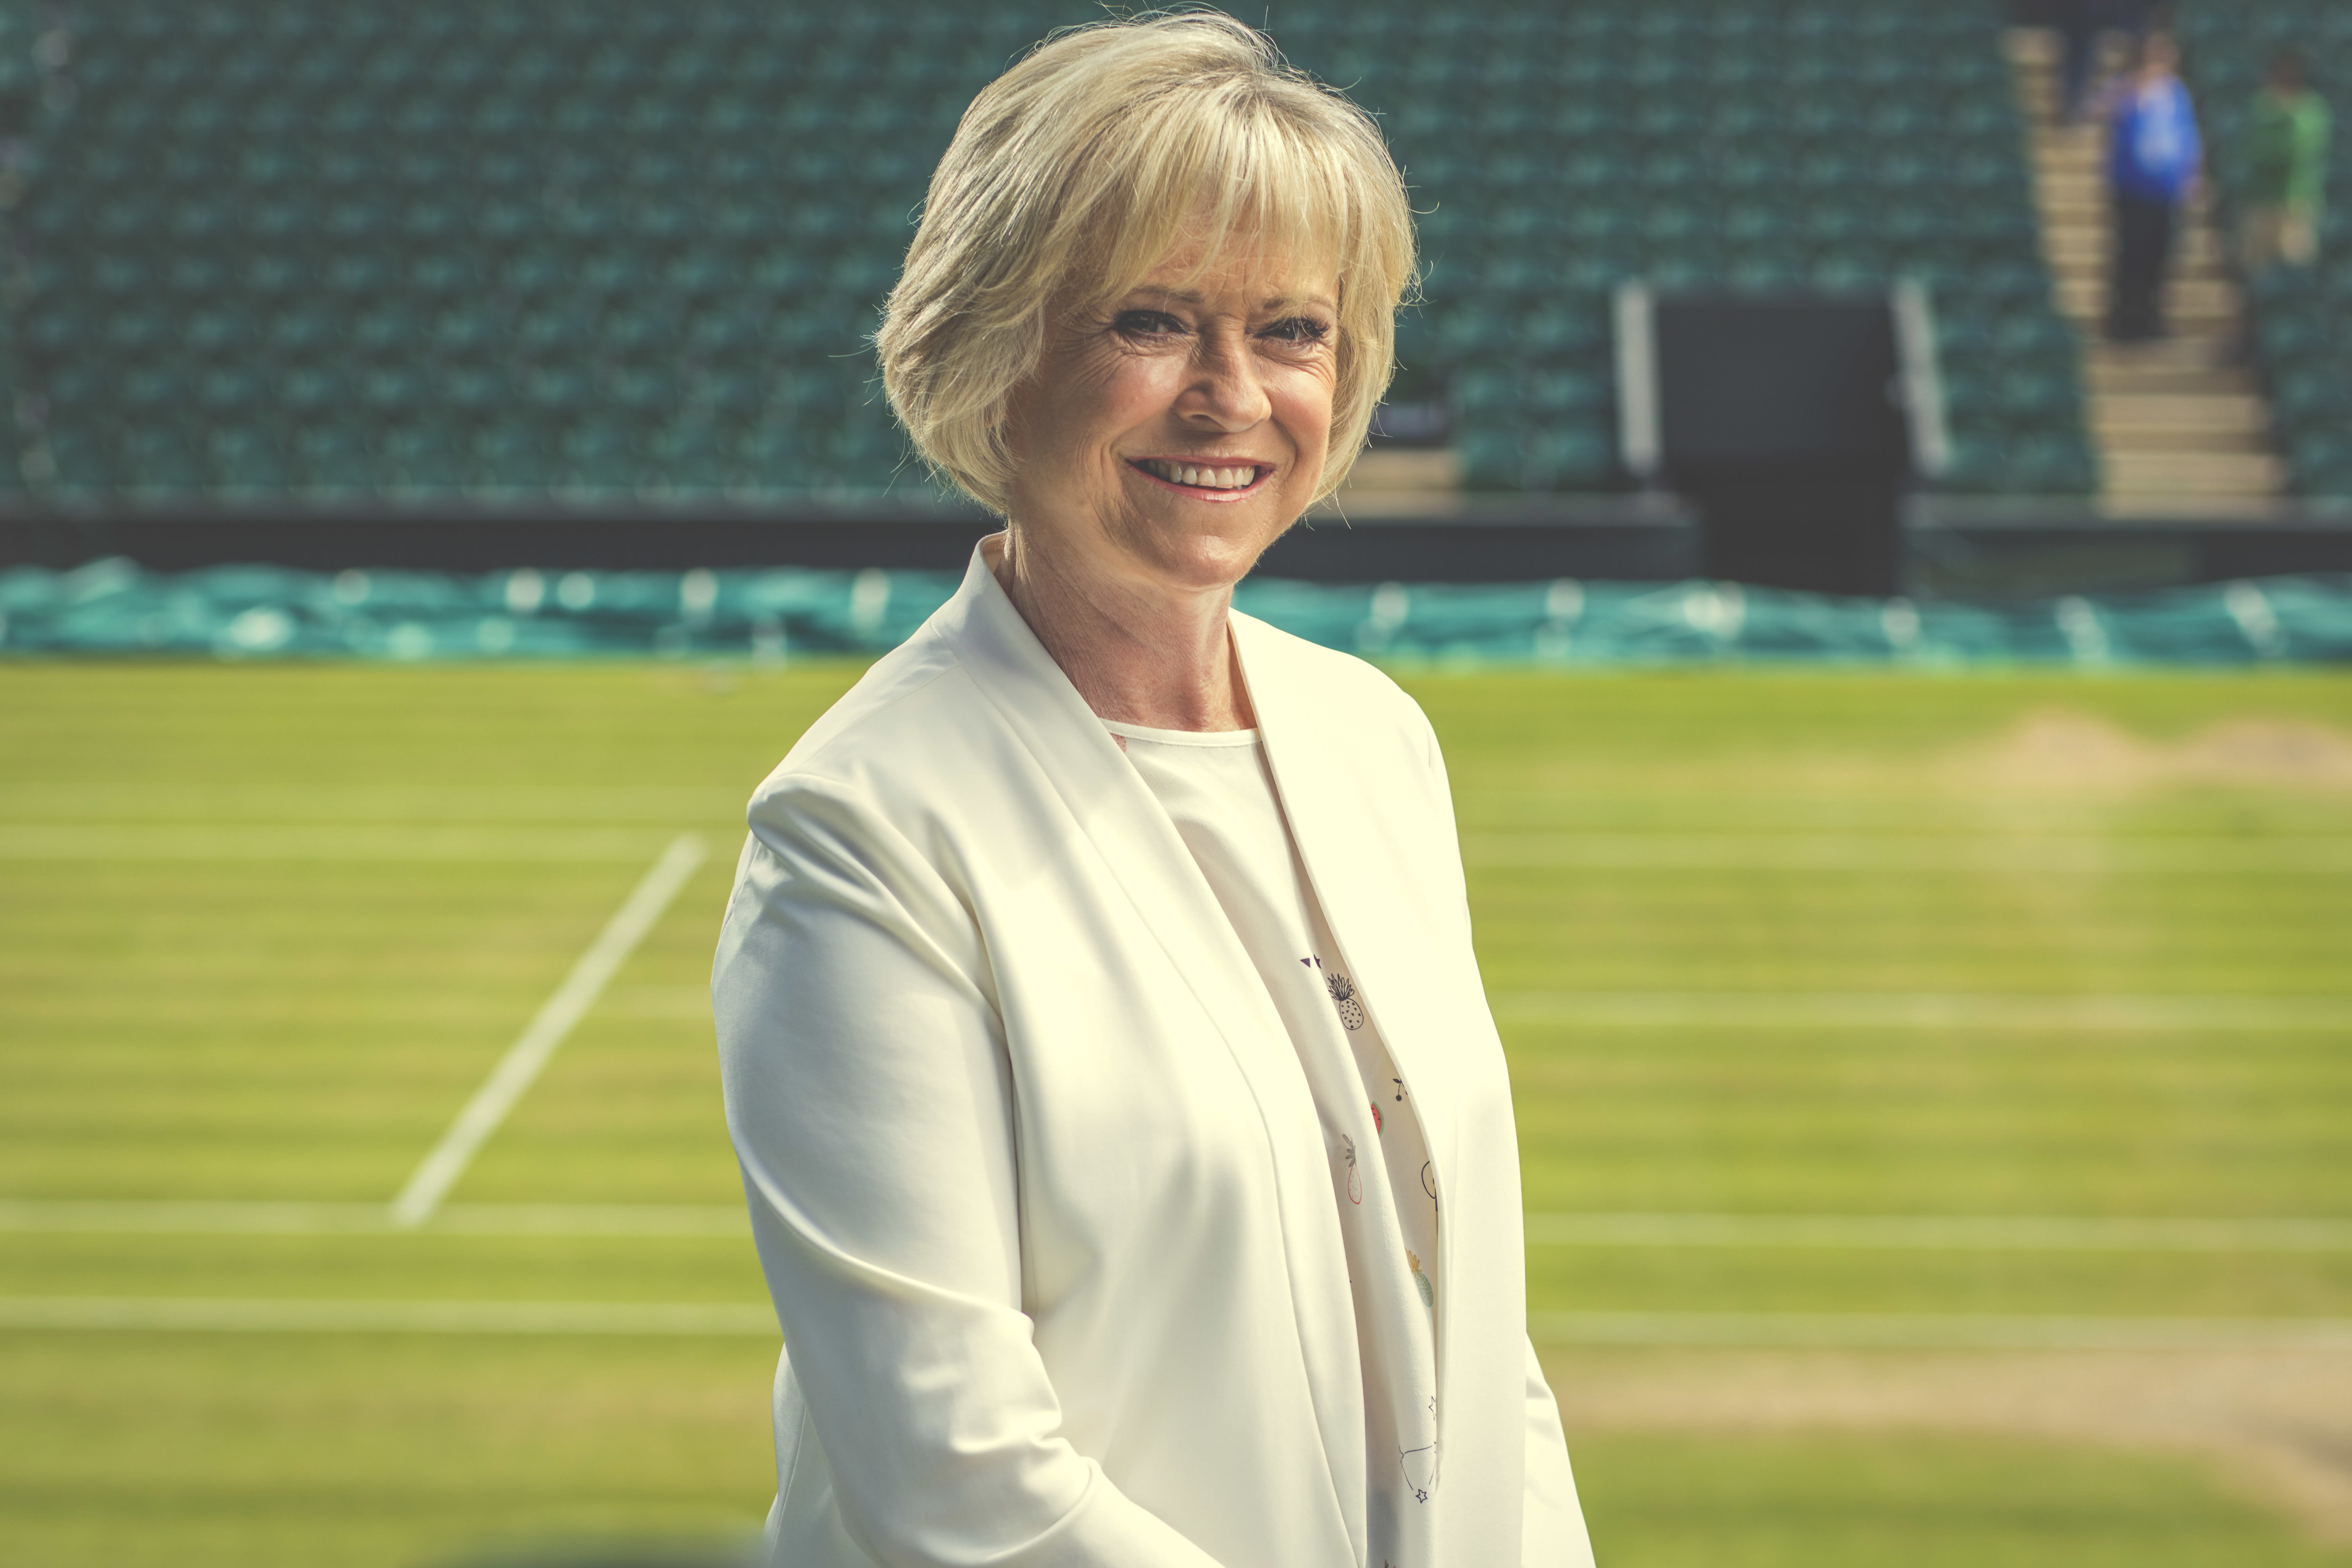 Sue Barker admits she lost tennis trophy after champagne celebration